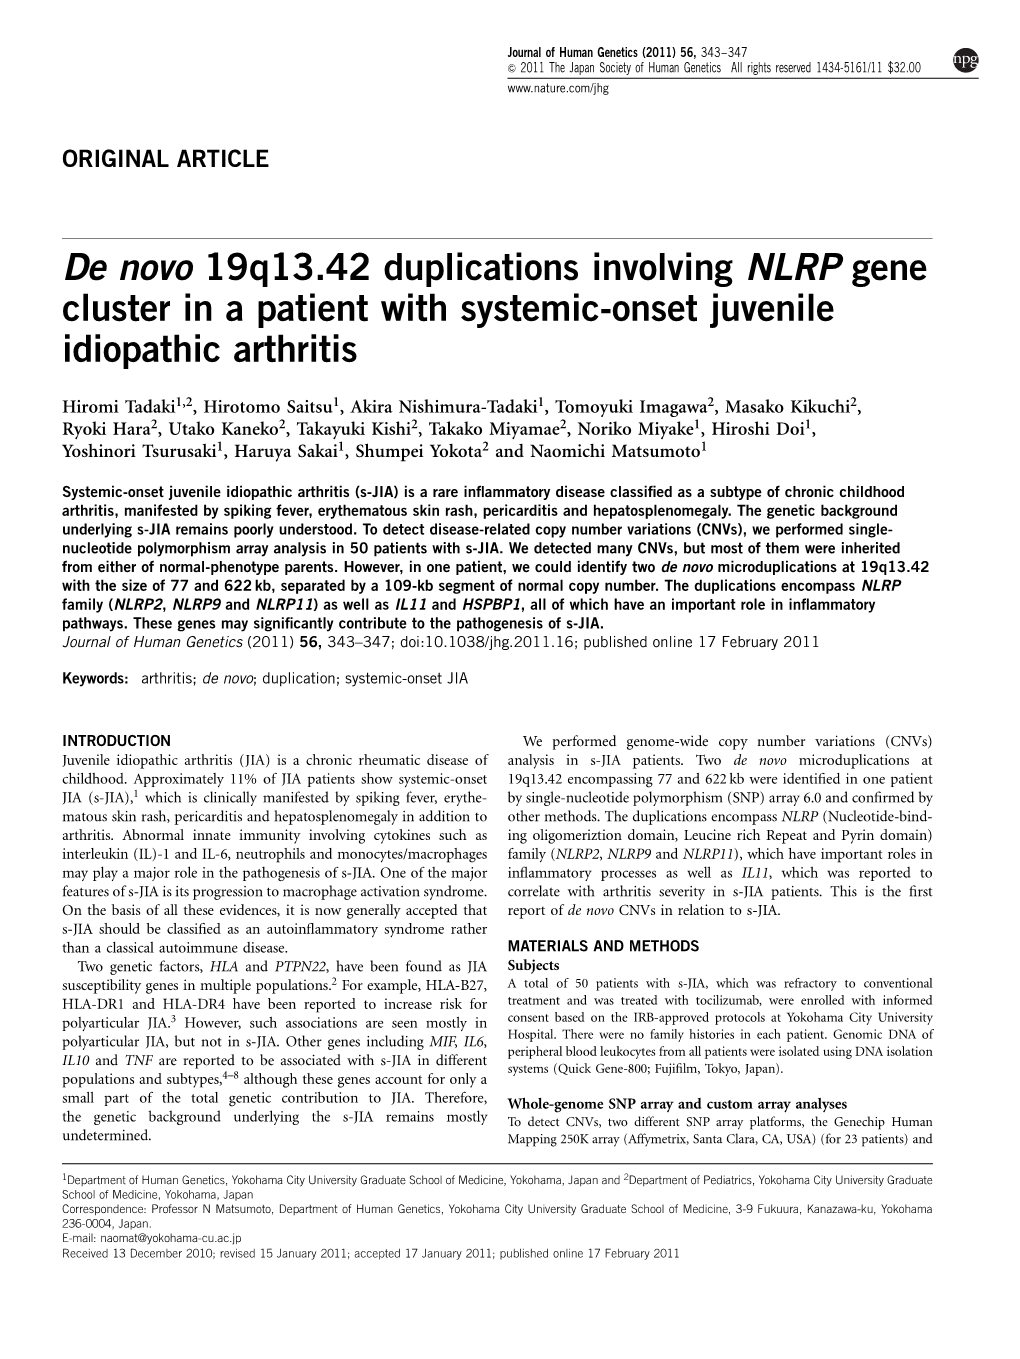 De Novo 19Q13.42 Duplications Involving NLRP Gene Cluster in a Patient with Systemic-Onset Juvenile Idiopathic Arthritis